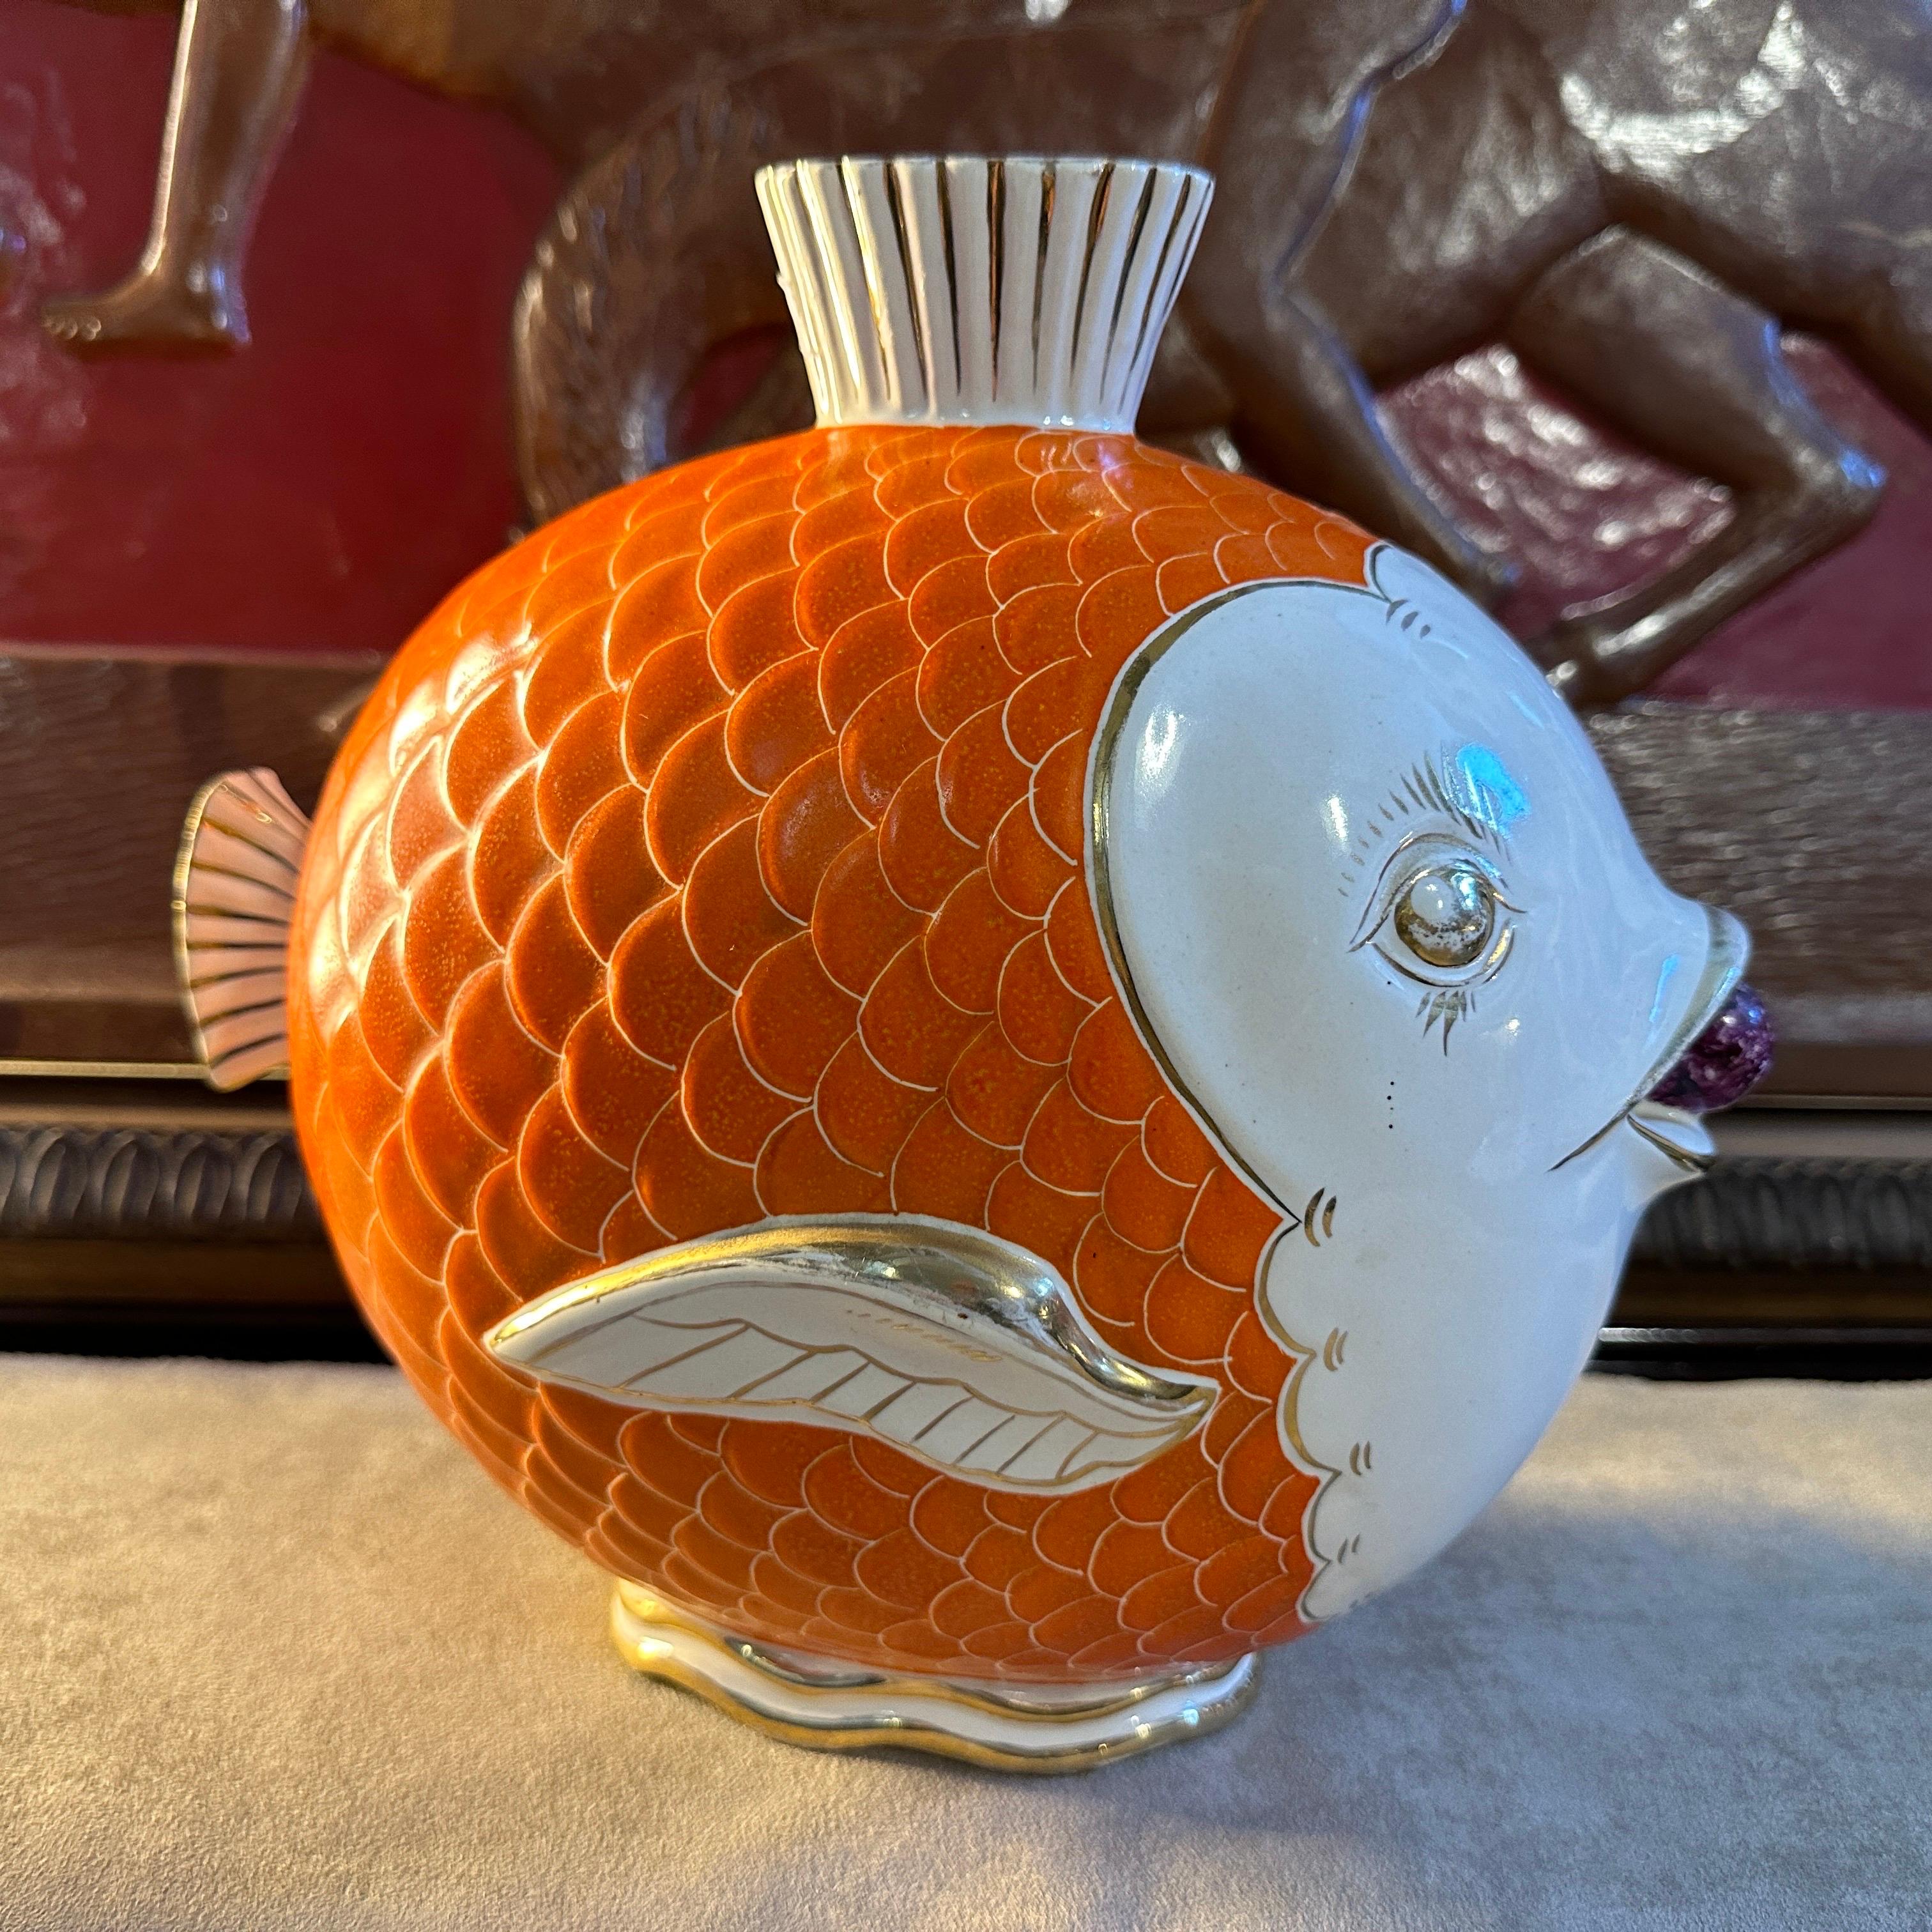 This Mid-Century Modern Ceramic Italian Fish Vase is a delightful blend of whimsy and sophistication, capturing the essence of mid-century design with its playful yet elegant aesthetic. Crafted in Umbertide Italy in the style of Pucci during the